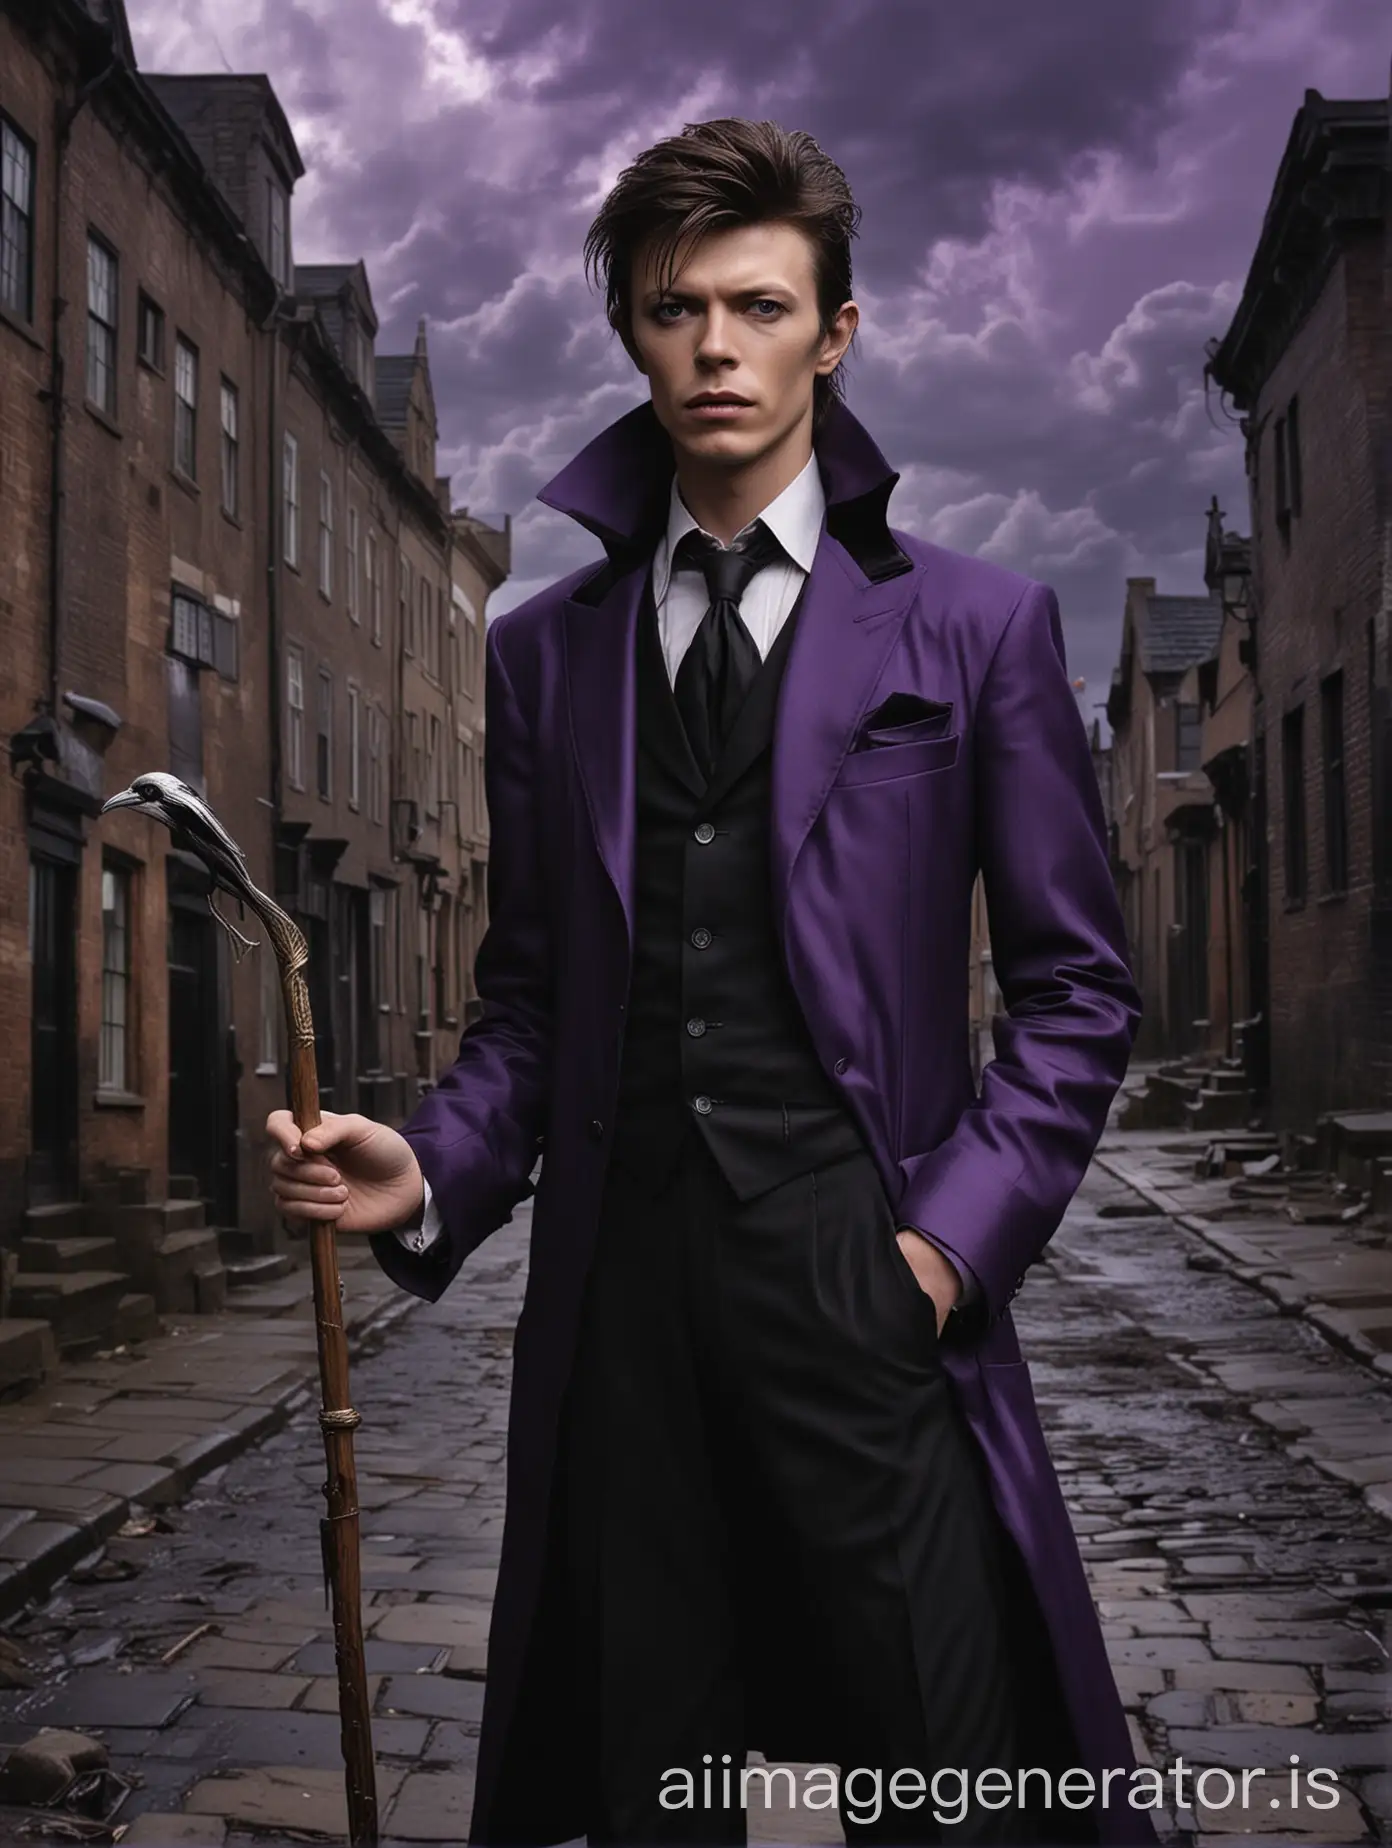 david bowie face in his early 20s, slender young man with a black hair, man holding a gentleman's cane with a silver-crow-shaped handle, man wearing black three-piece suit with a purple vest, midnight background with a stormy clouds, old city background, wooden buildings